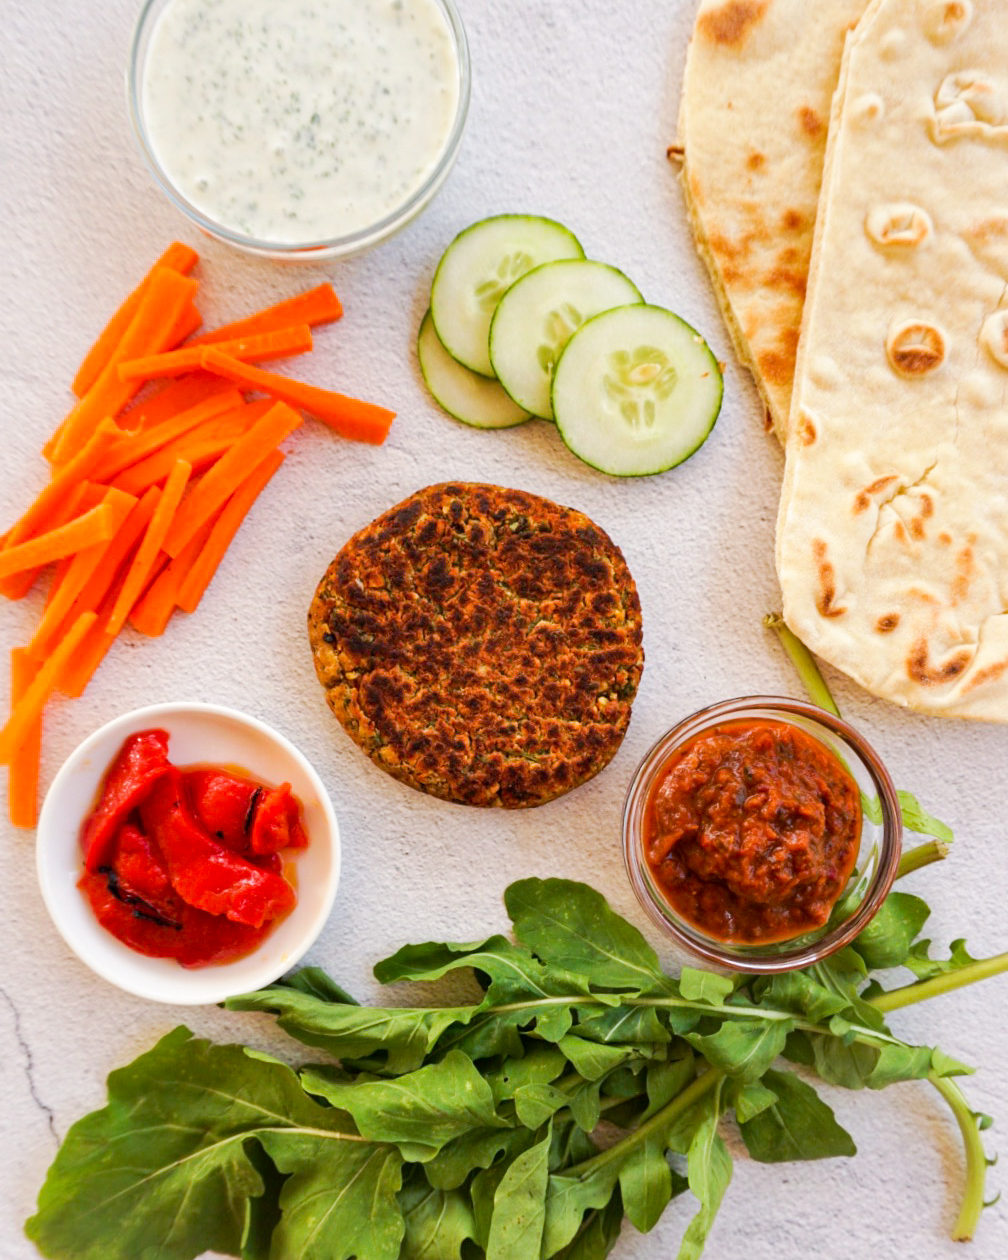 Falafel naan burger - another healthy recipe by Familicious